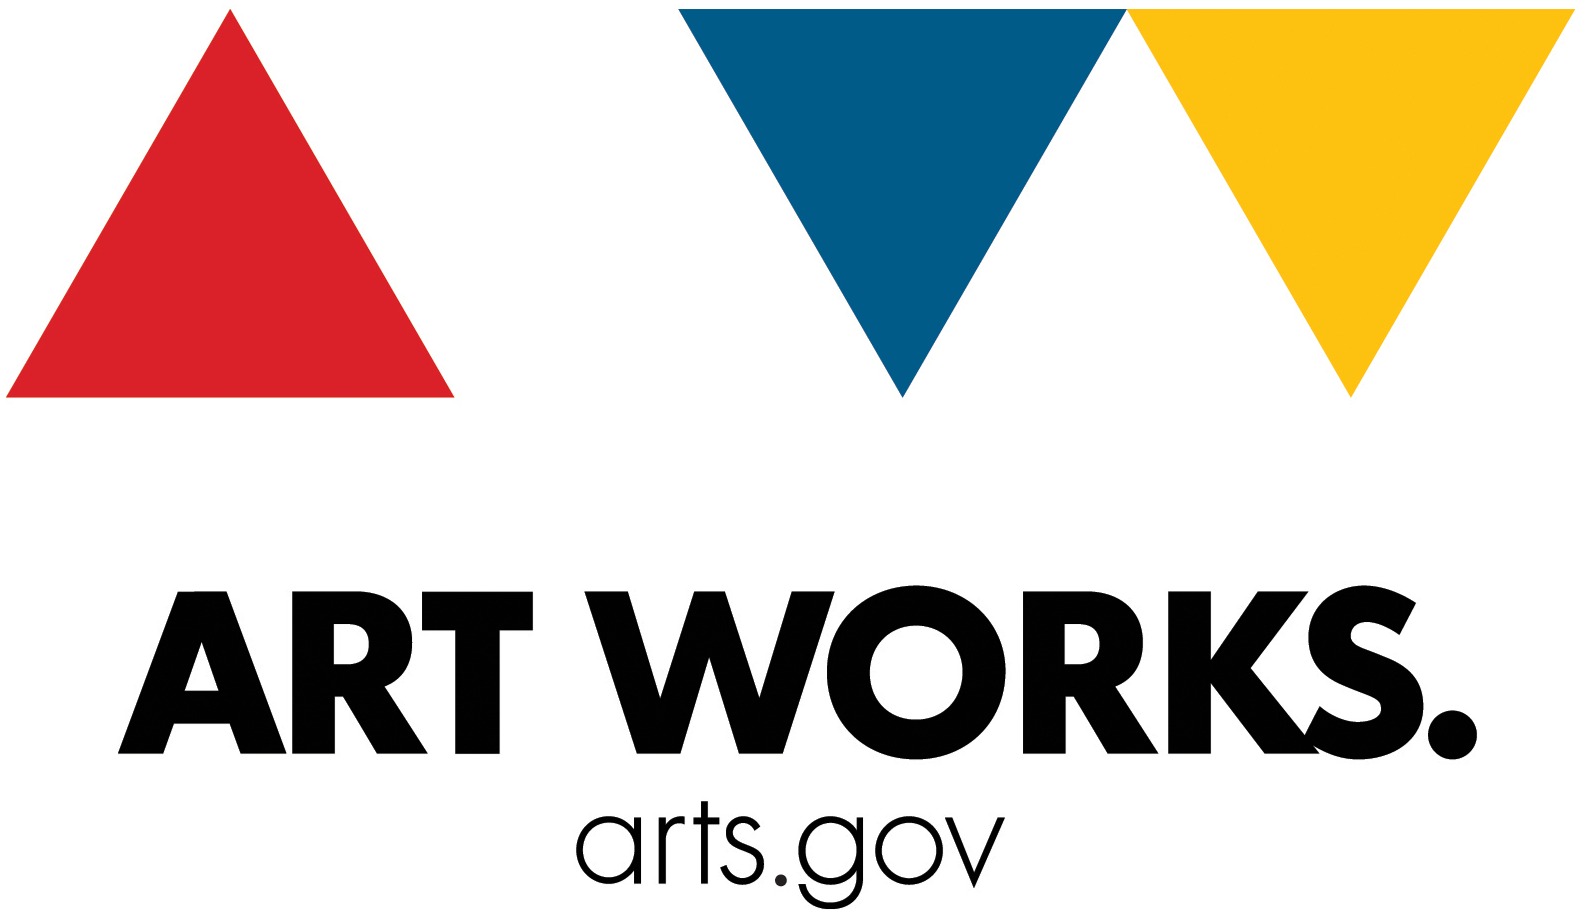 White House proposes to eliminate National Endowment for the Arts